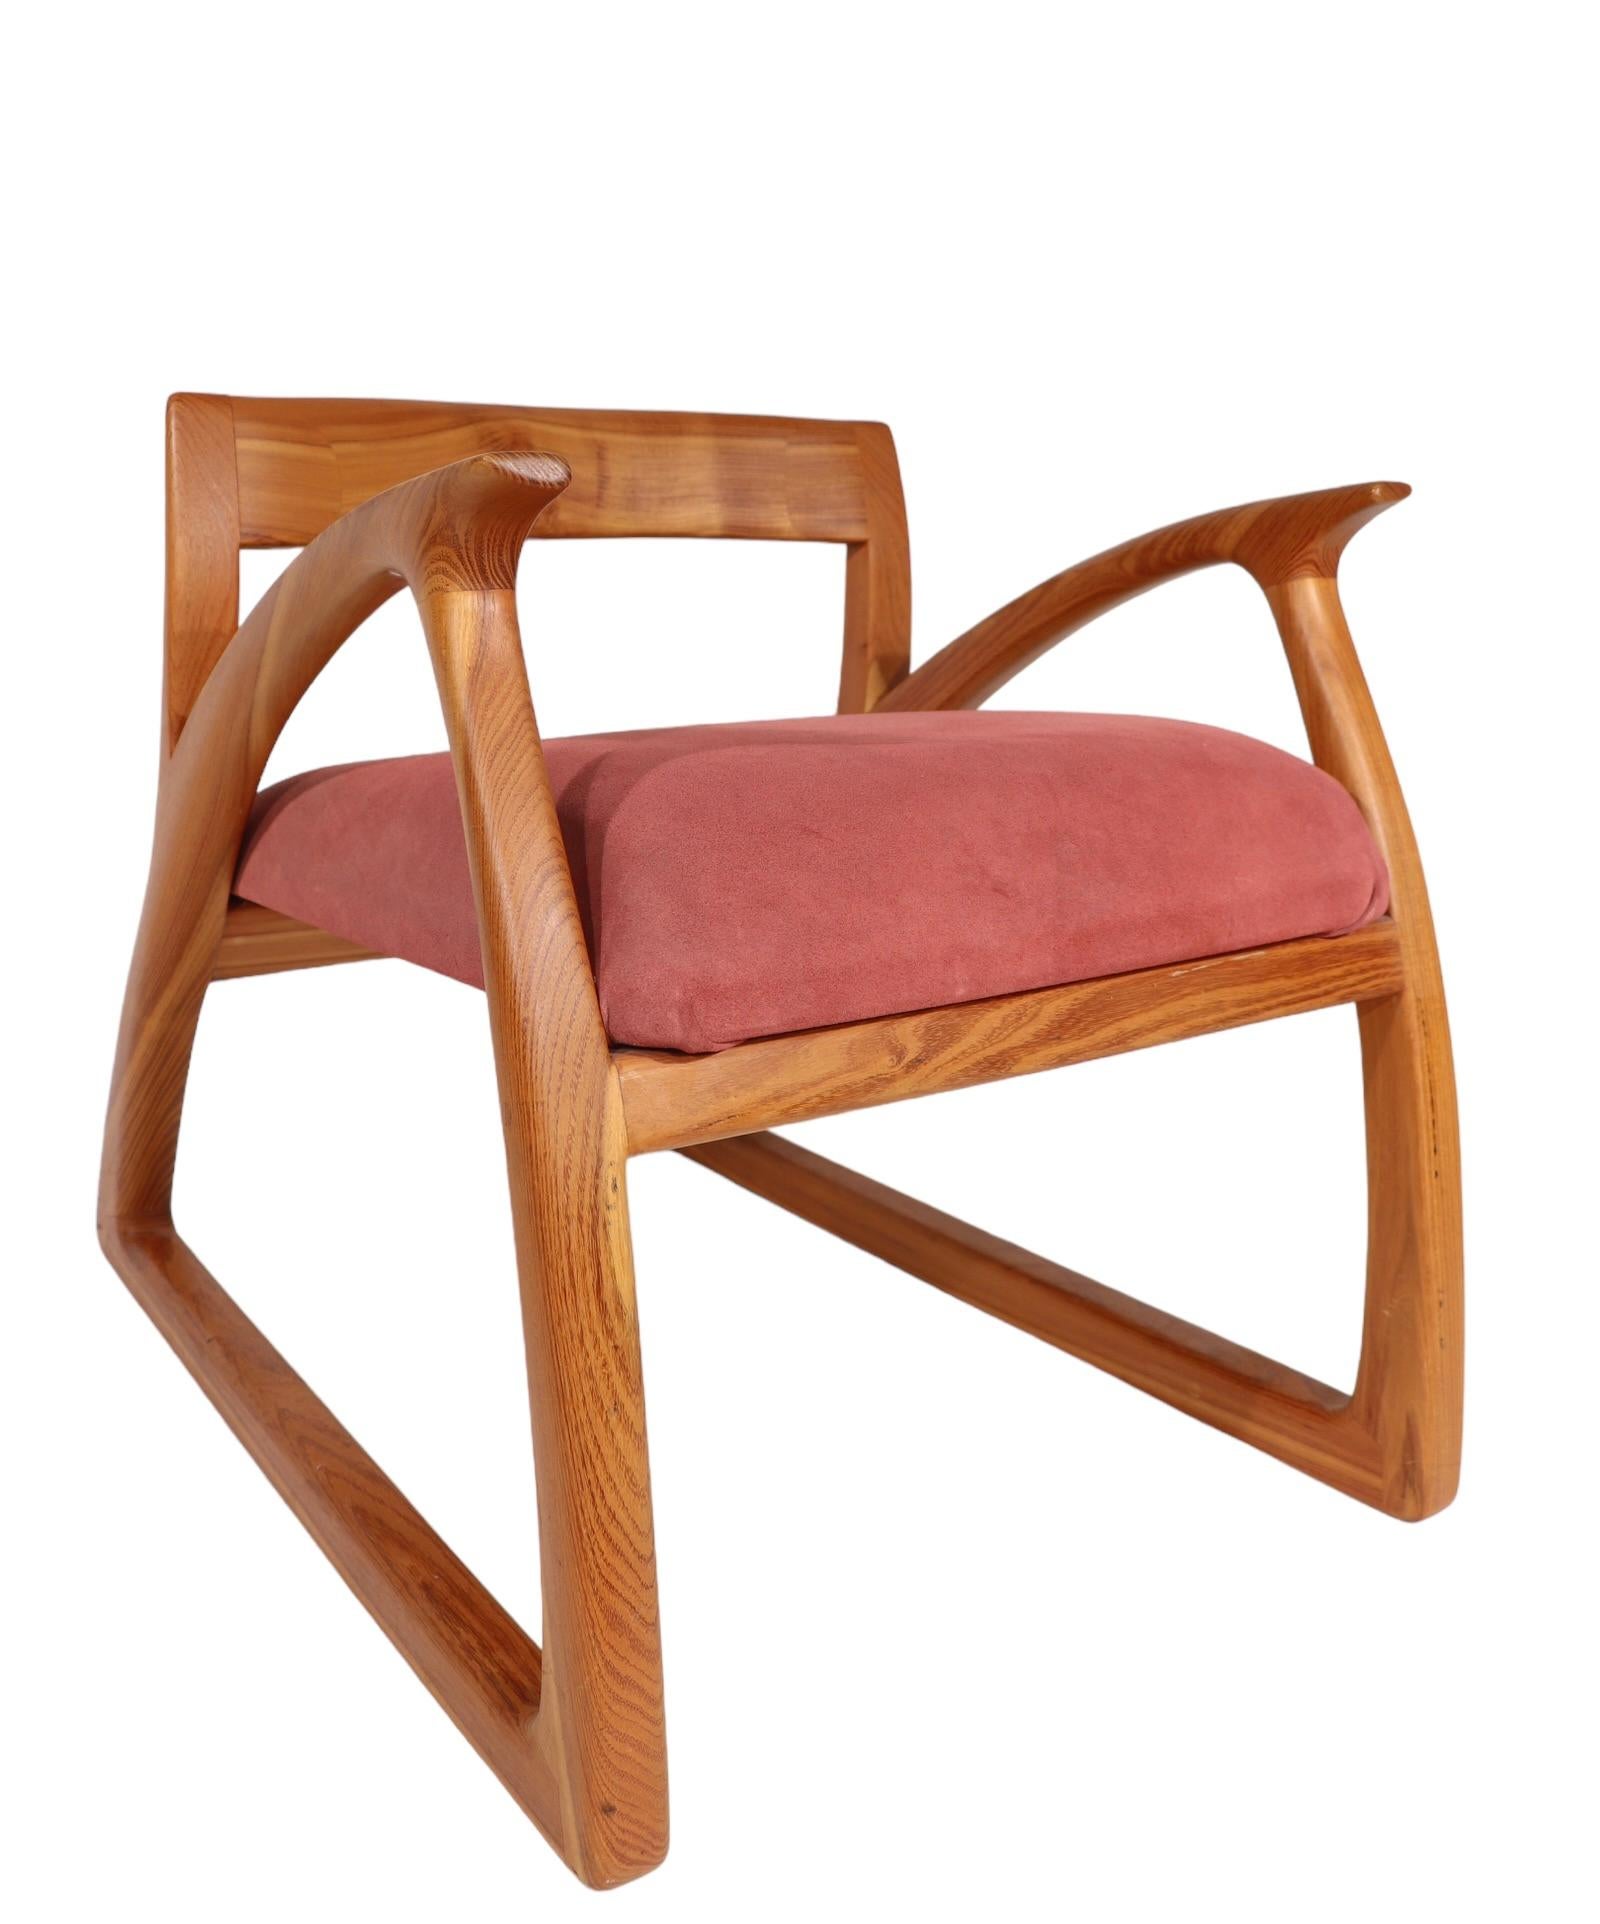 Studio Hand Made - Crafted Wood Arm / Lounge Chair For Sale 3